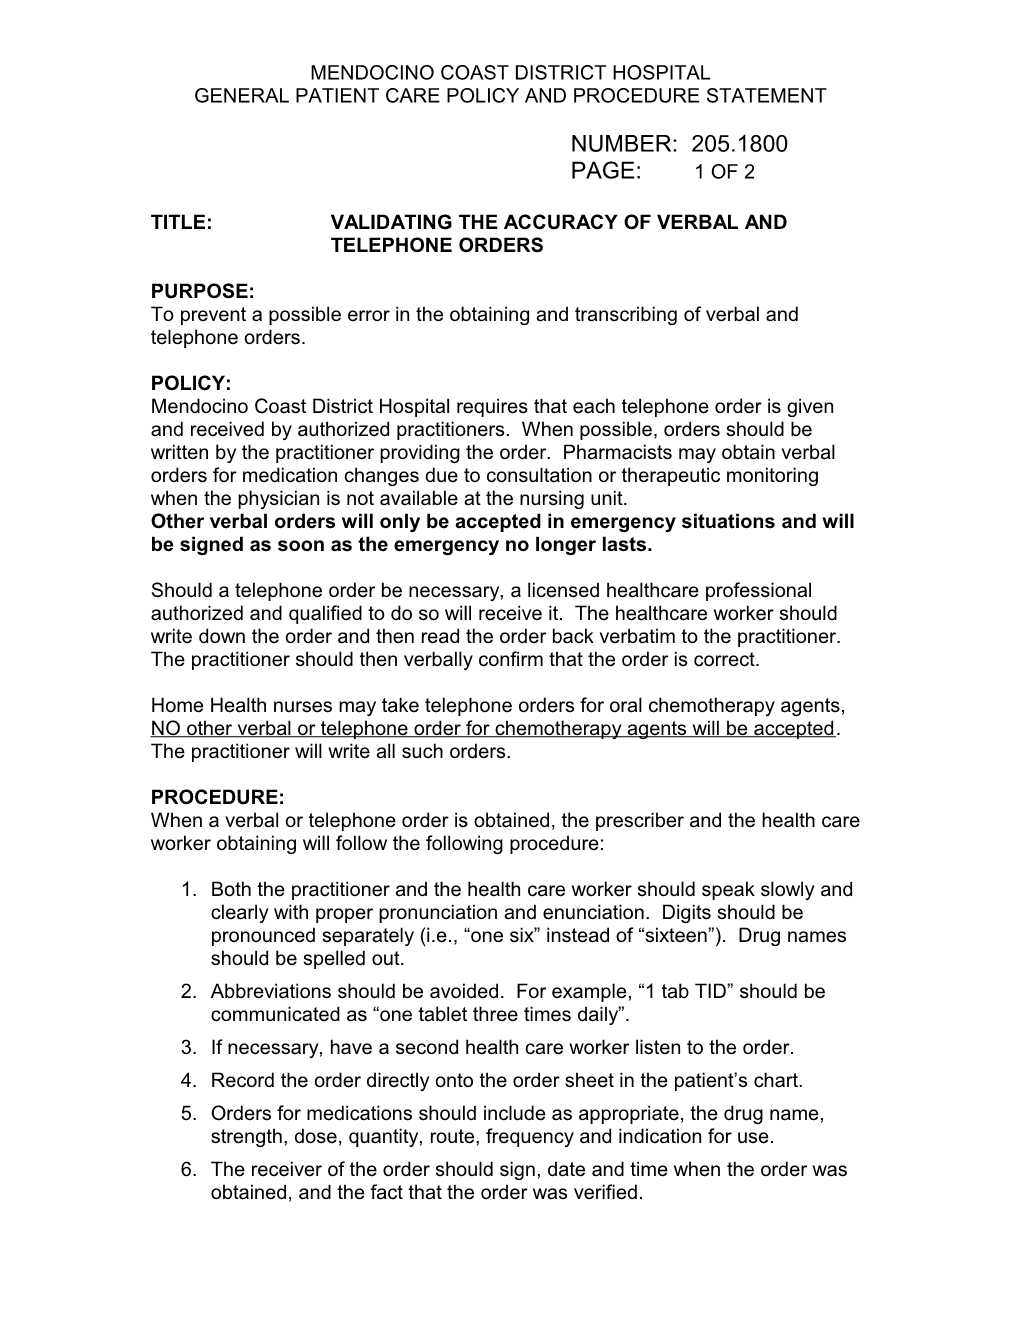 General Patient Care Policy and Procedure Statement s3